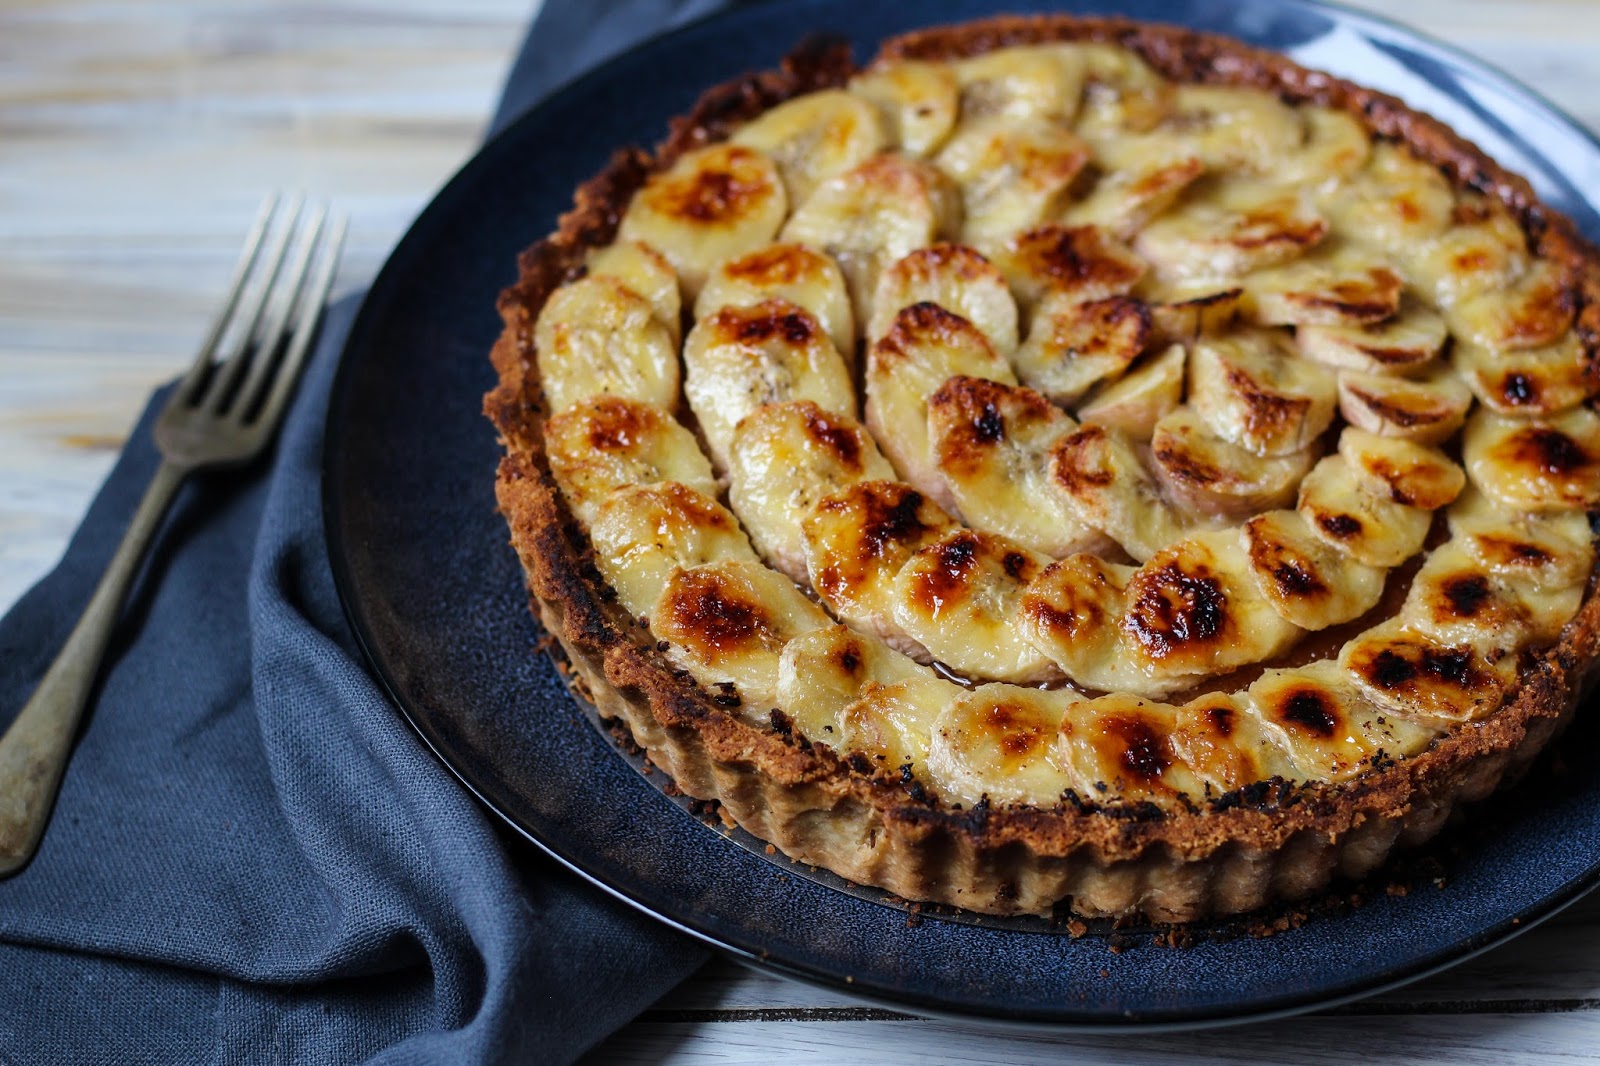 The Spoon and Whisk: Caramelised Banana Tart